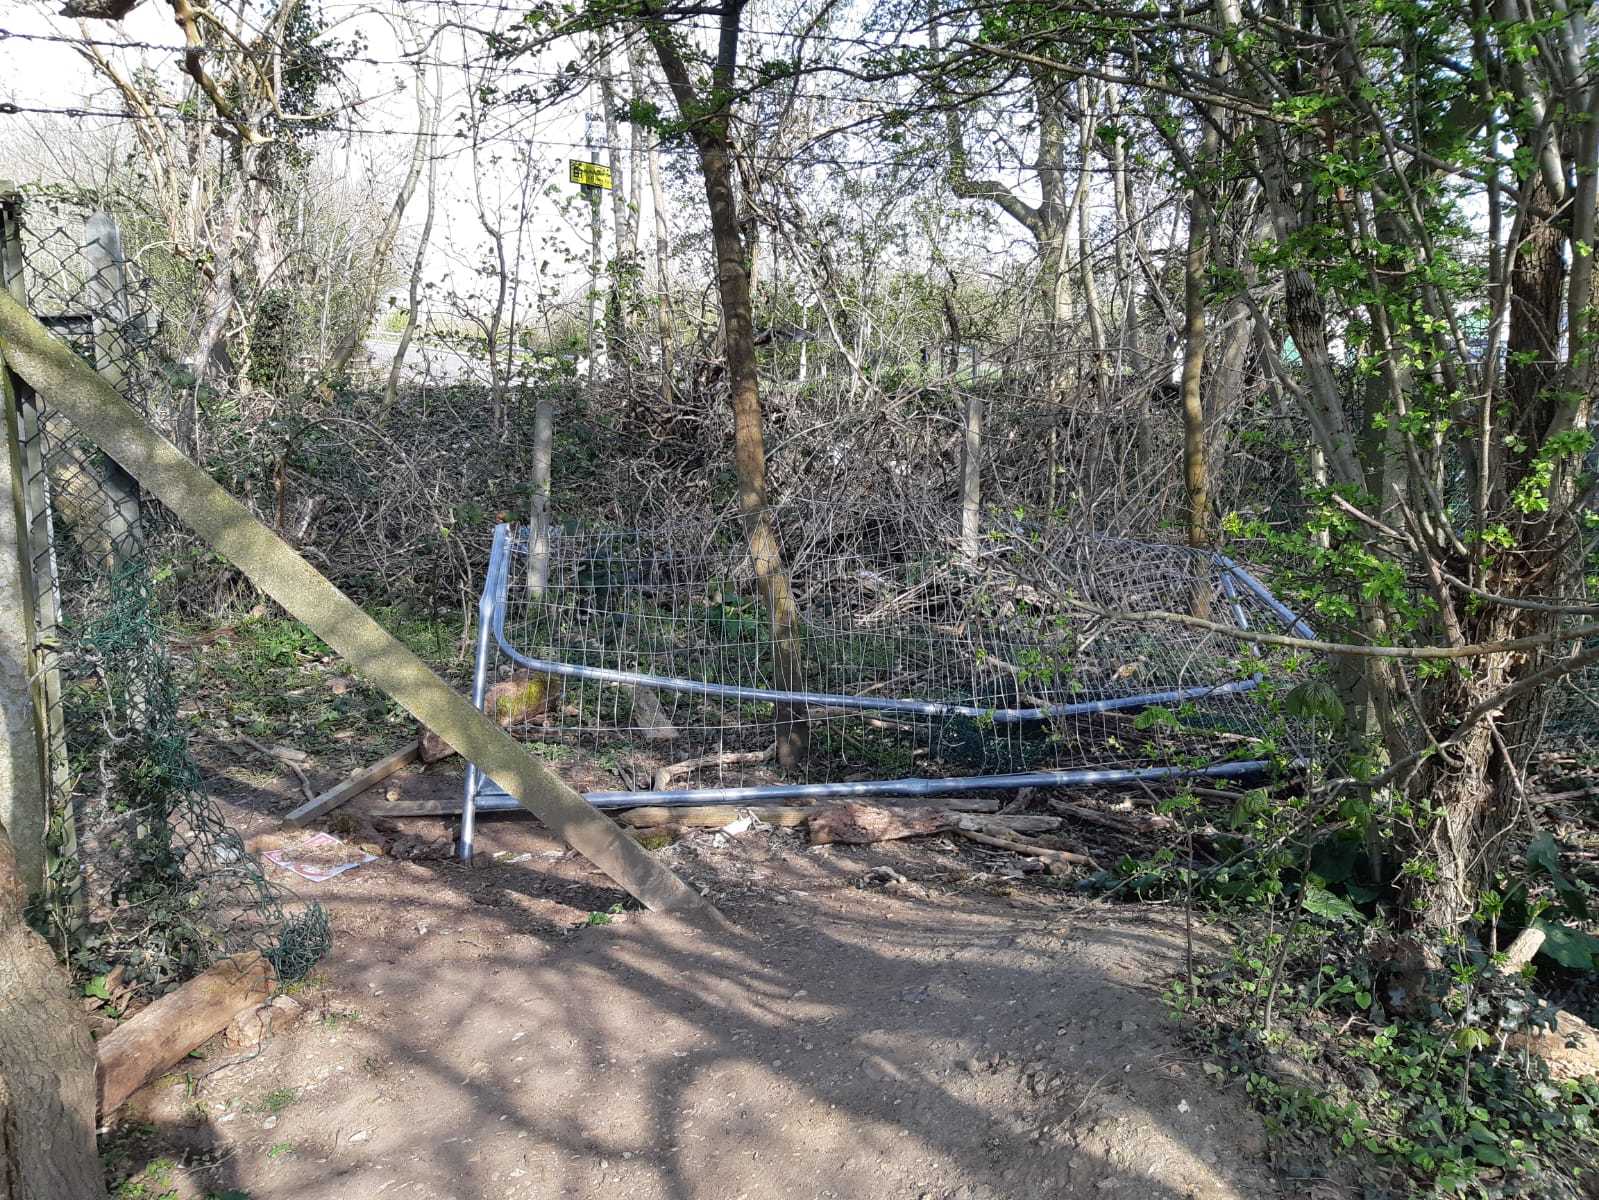 Some of the damaged fencing at Bushey Hall Golf Club. Credit: Hertfordshire Constabulary